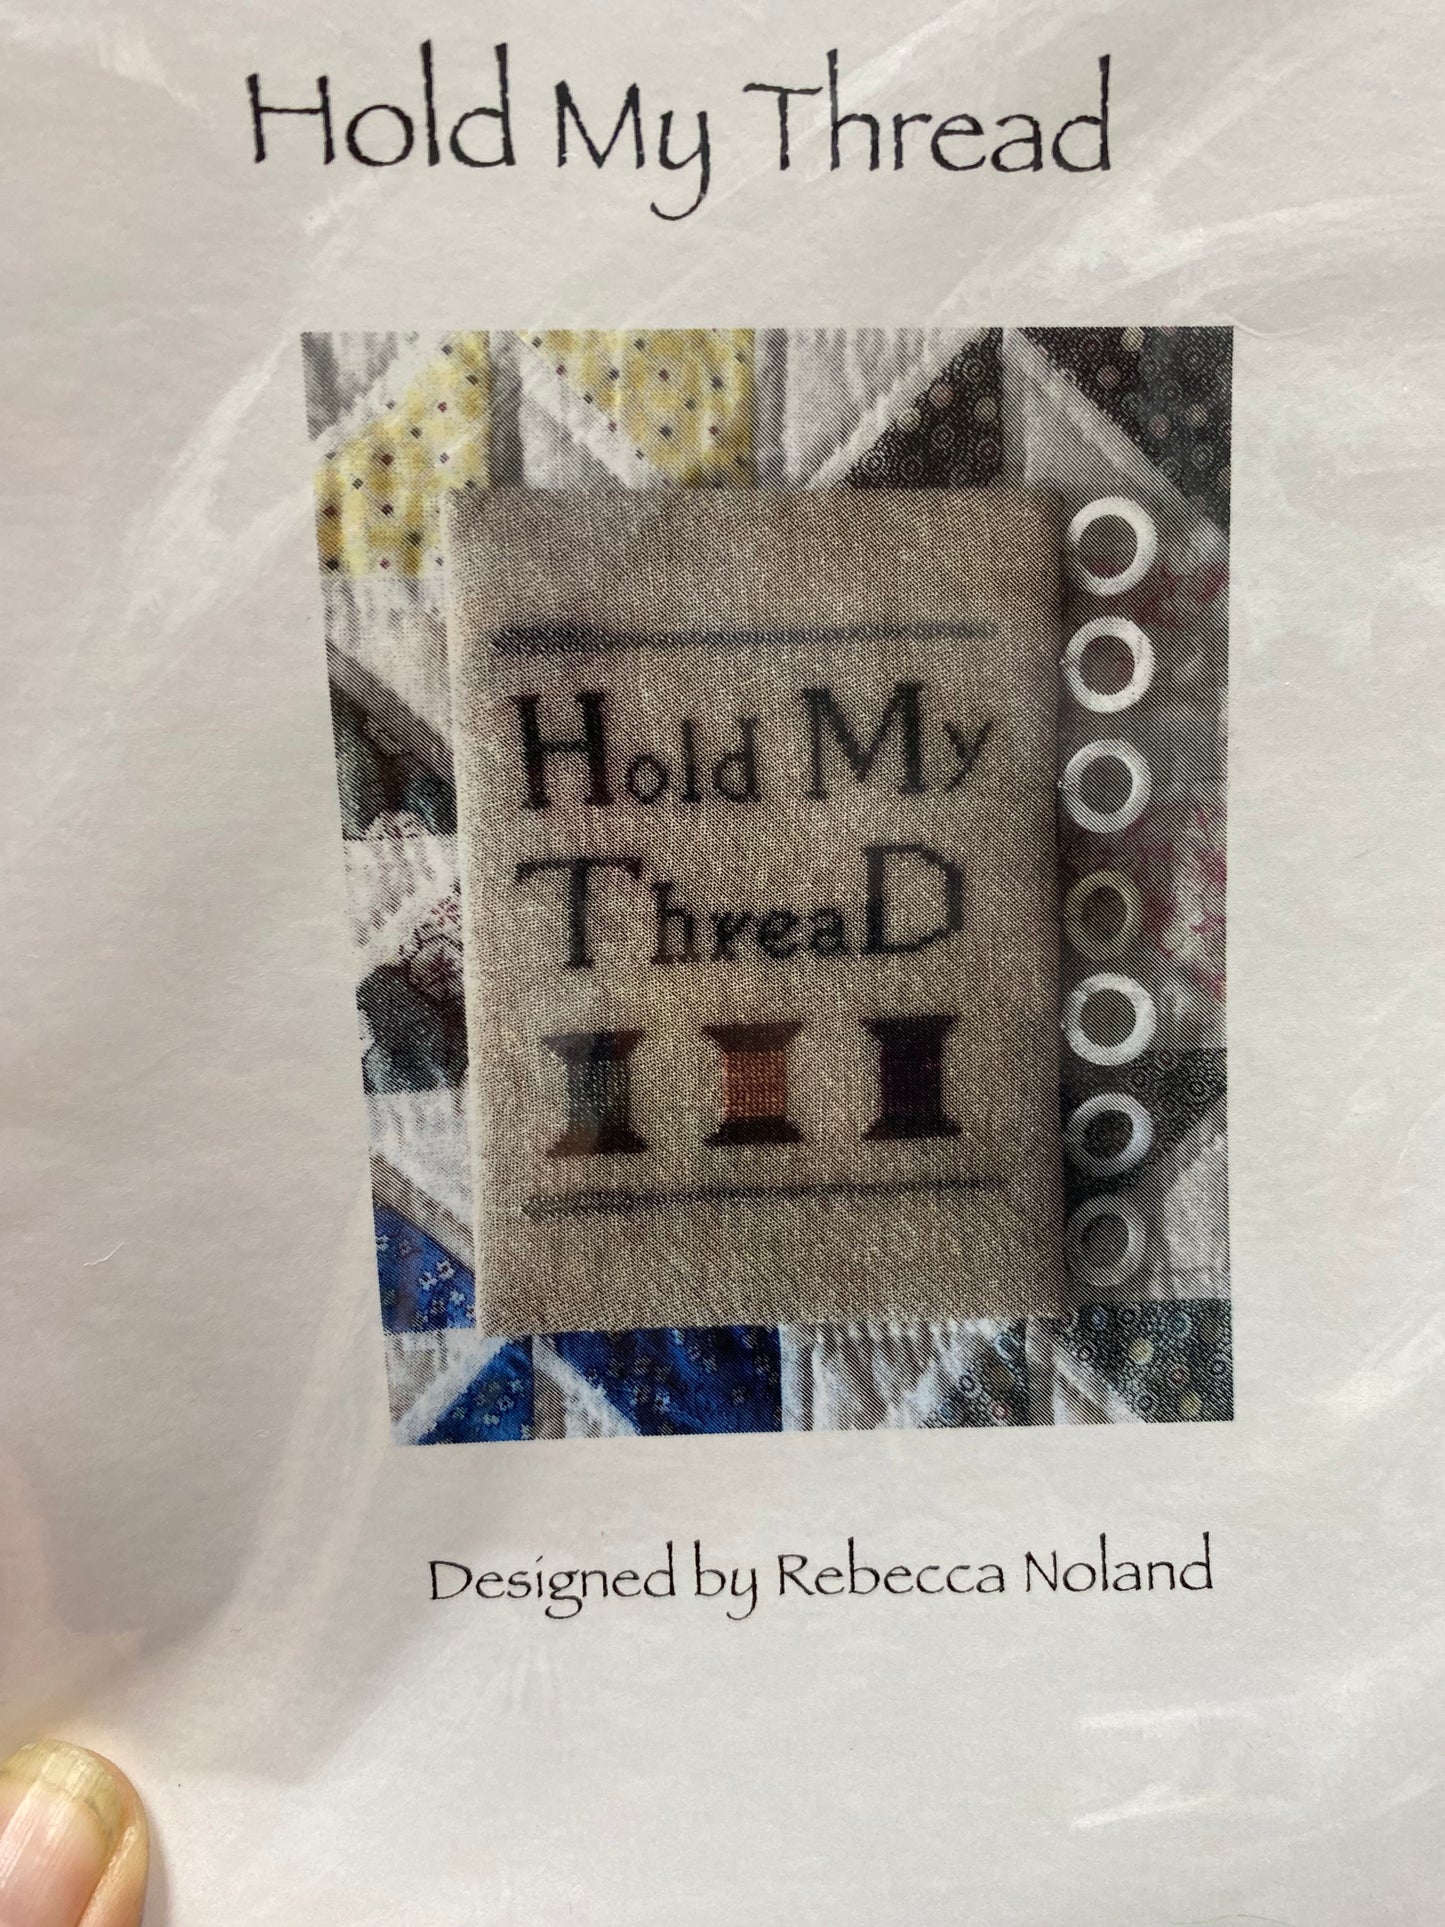 Hold my thread by Lucy Beam